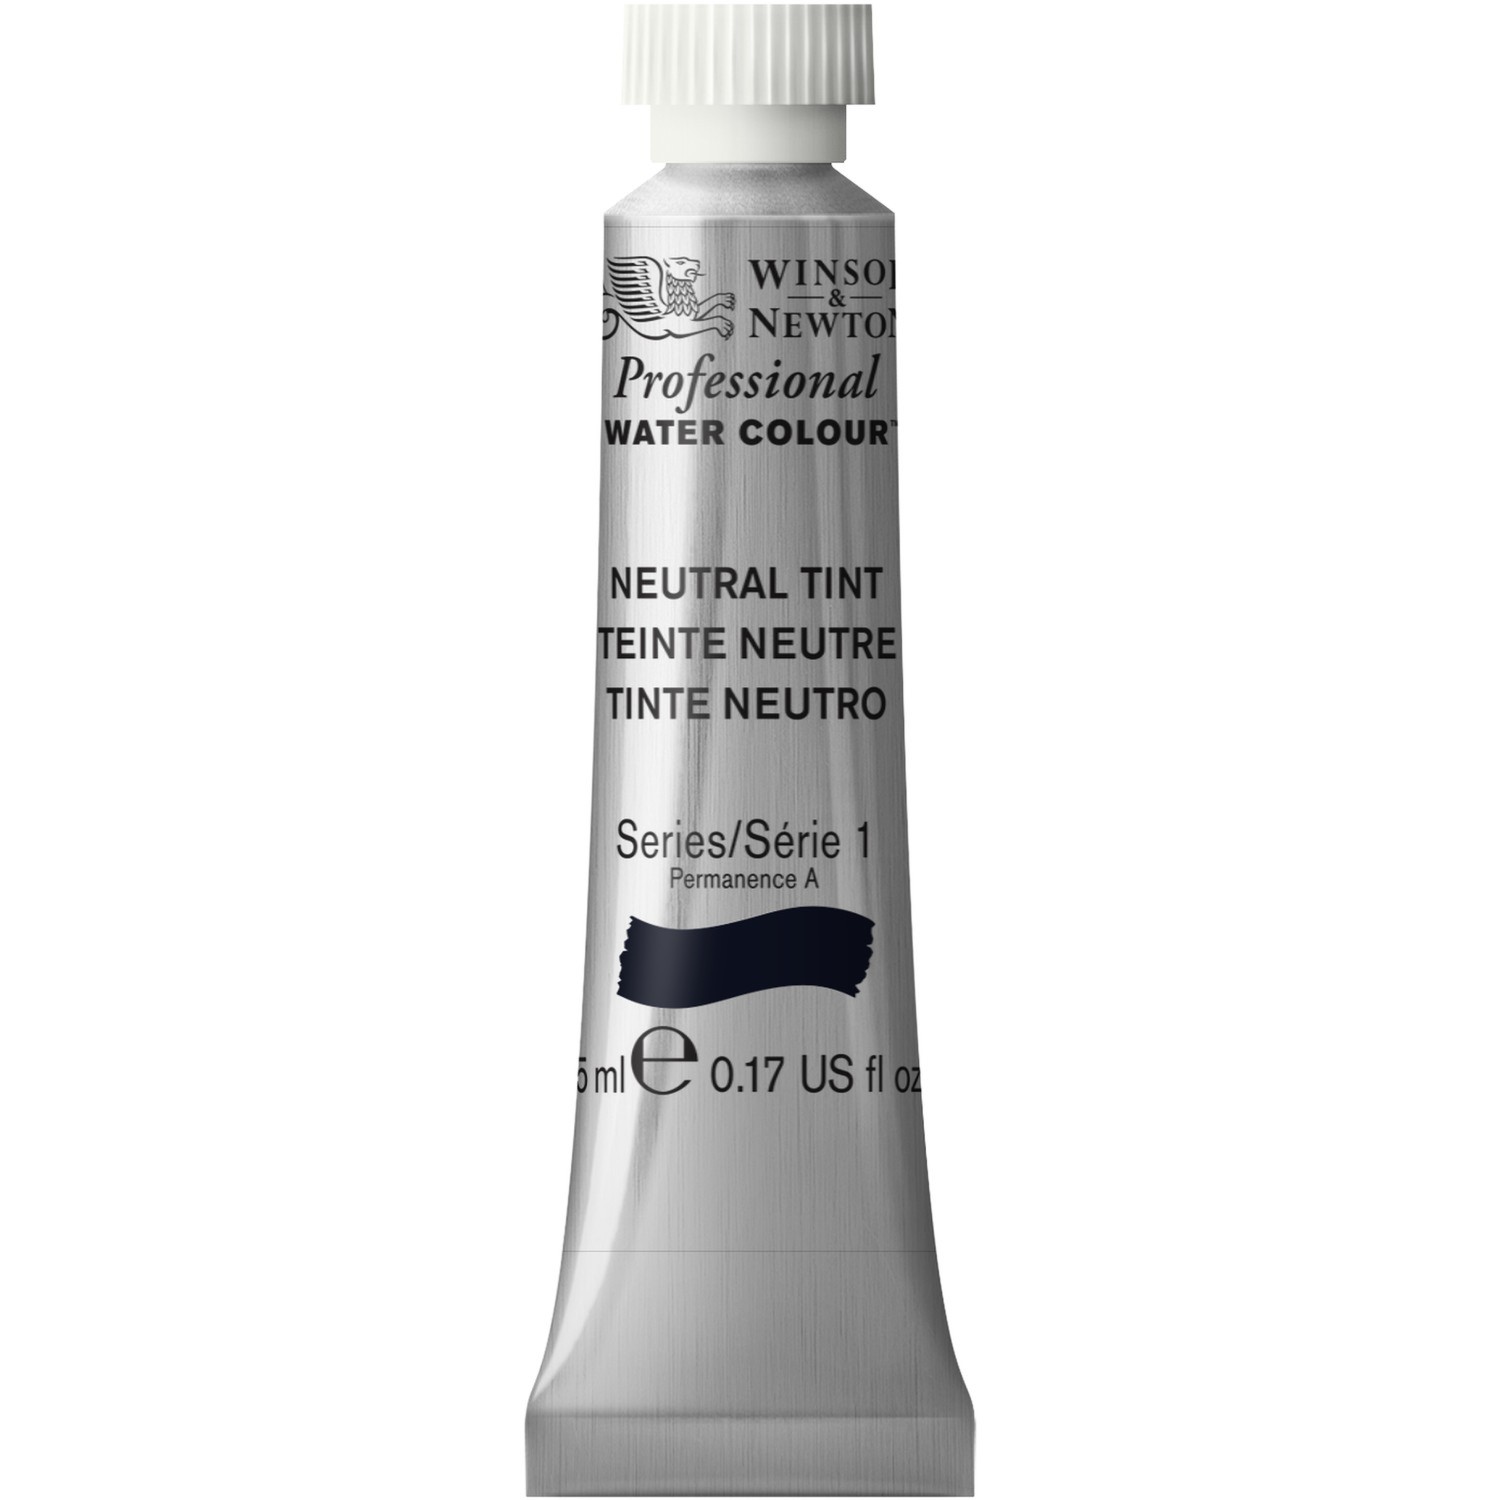 Winsor and Newton 5ml Professional Watercolour Paint - Neutral Tint Image 1